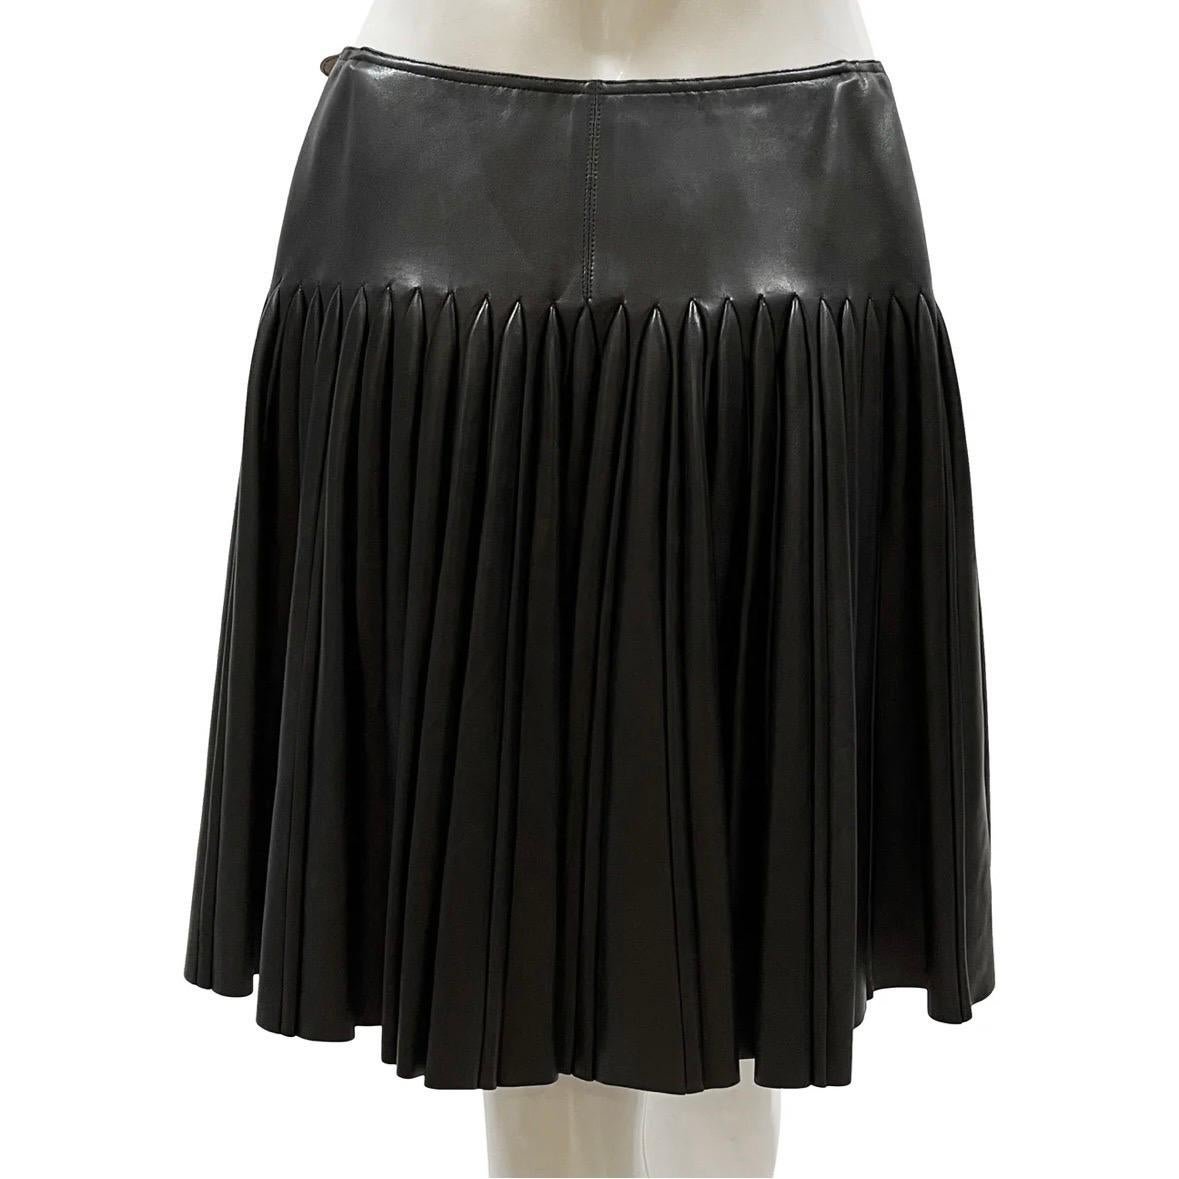 Pleated vintage mini skirt by Azzedine Alaia
Made in France 
Black leather   
Pleated around back and sides with smooth front panel
Double buckle side wrap closure (internal hook closure)
Waist buckles are adjustable
Bronze-tone hardware  
100%